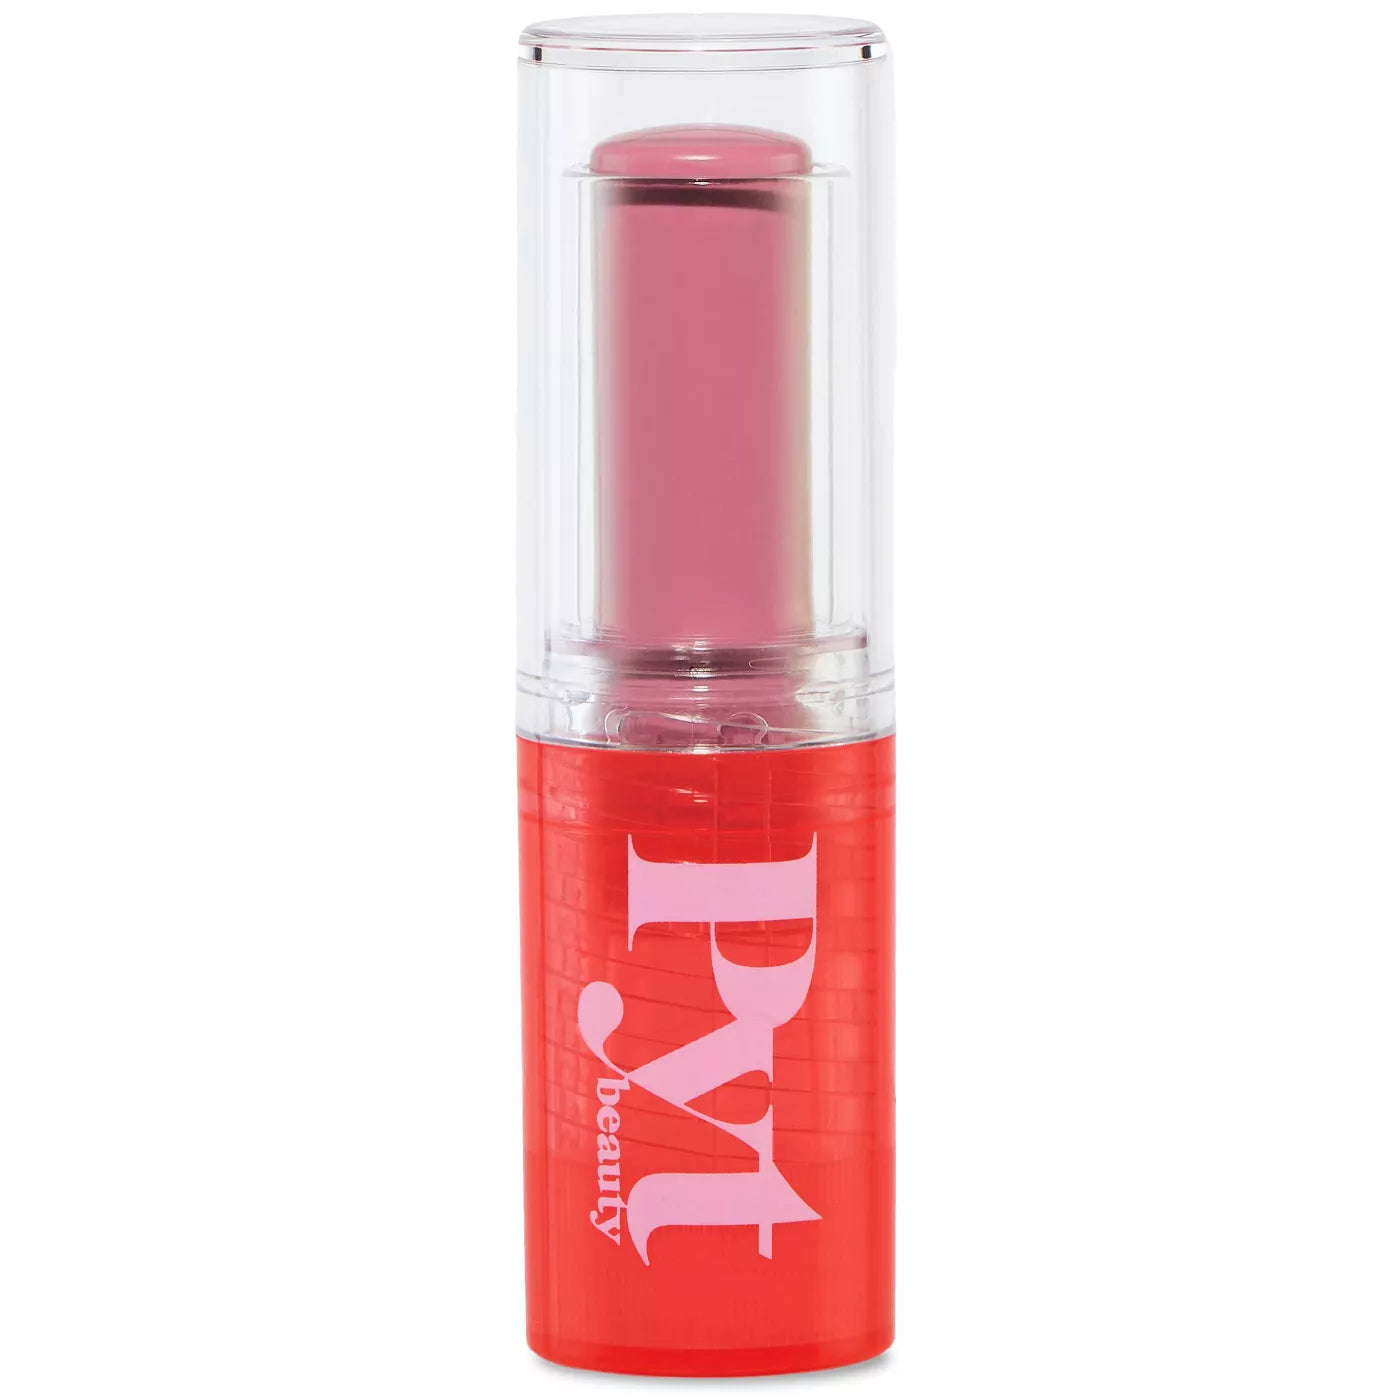 PYT Beauty So Extra Tinted Lip Balm | Boss Babe (Soft Pink Nude)